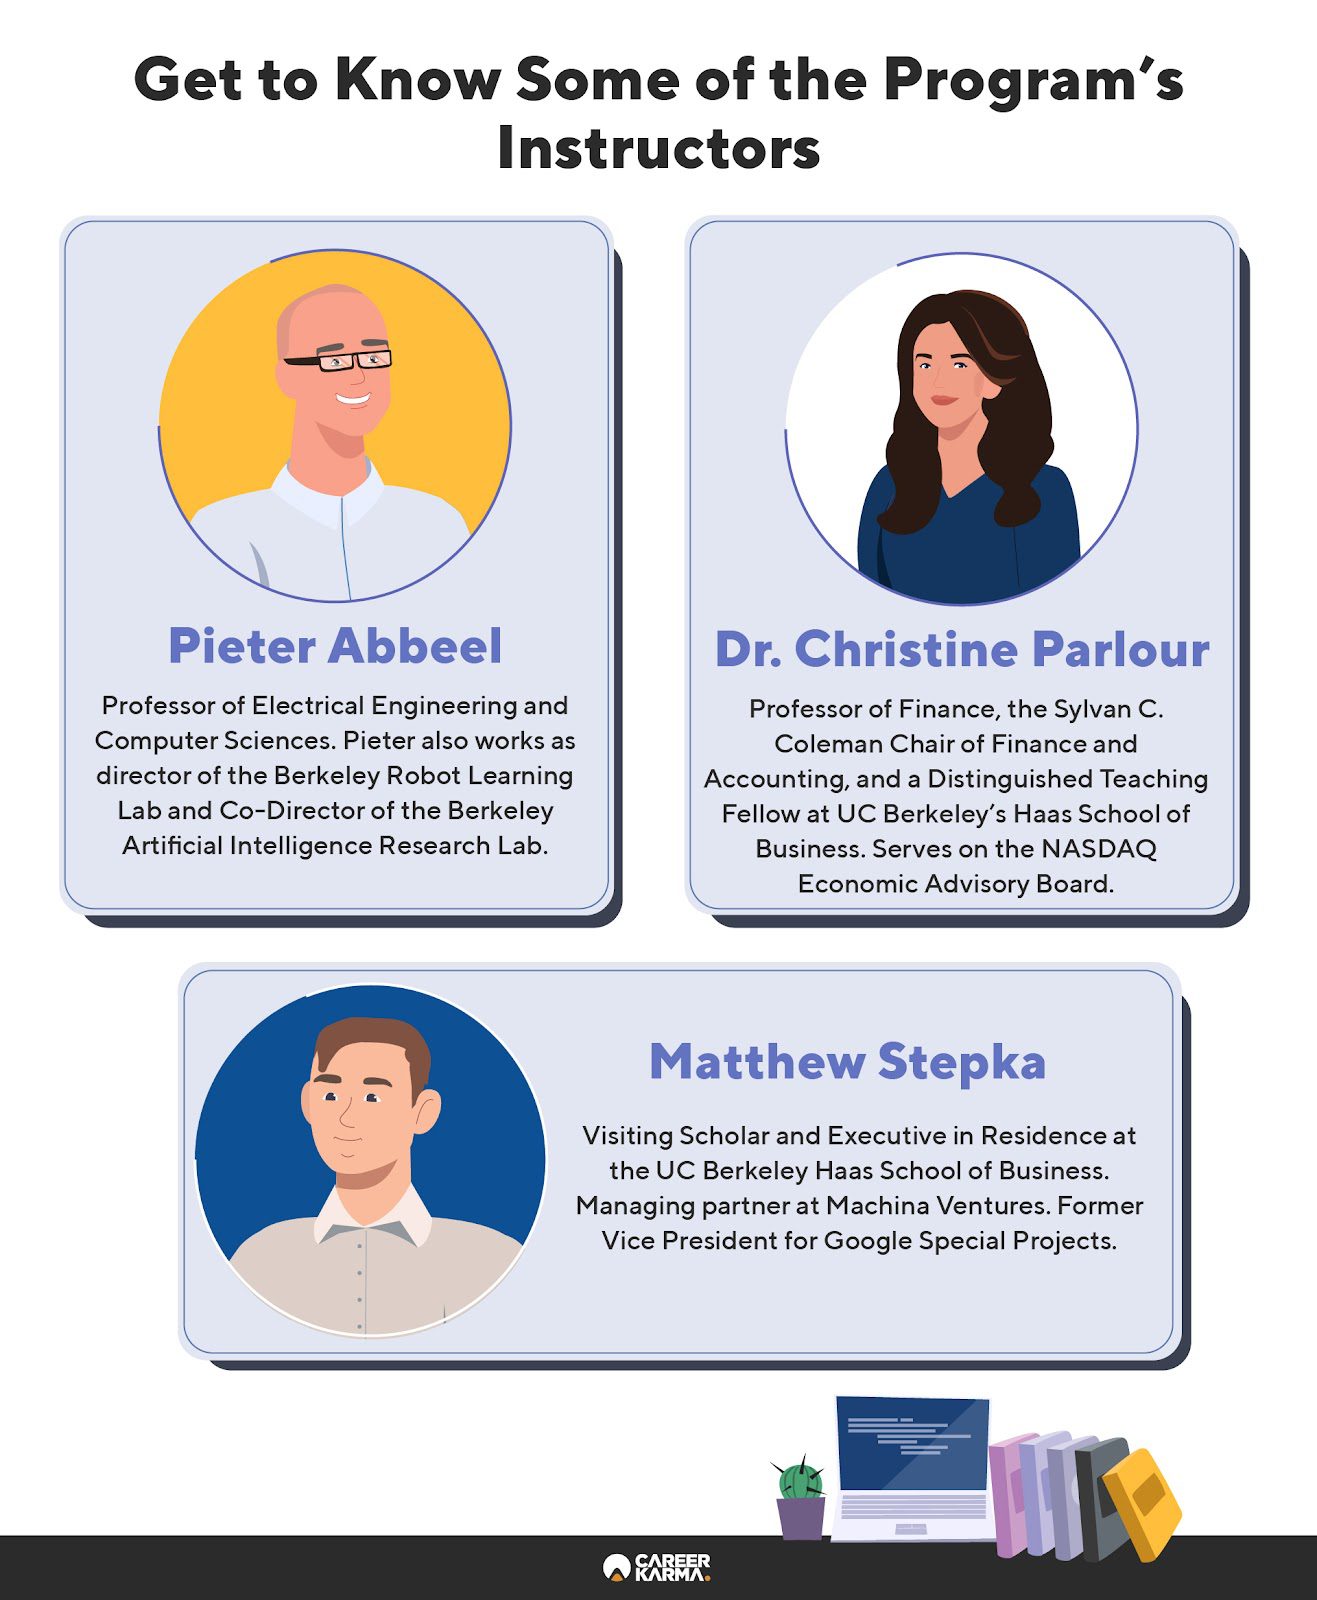 An infographic featuring instructors for UC Berkeley’s Tech Leader